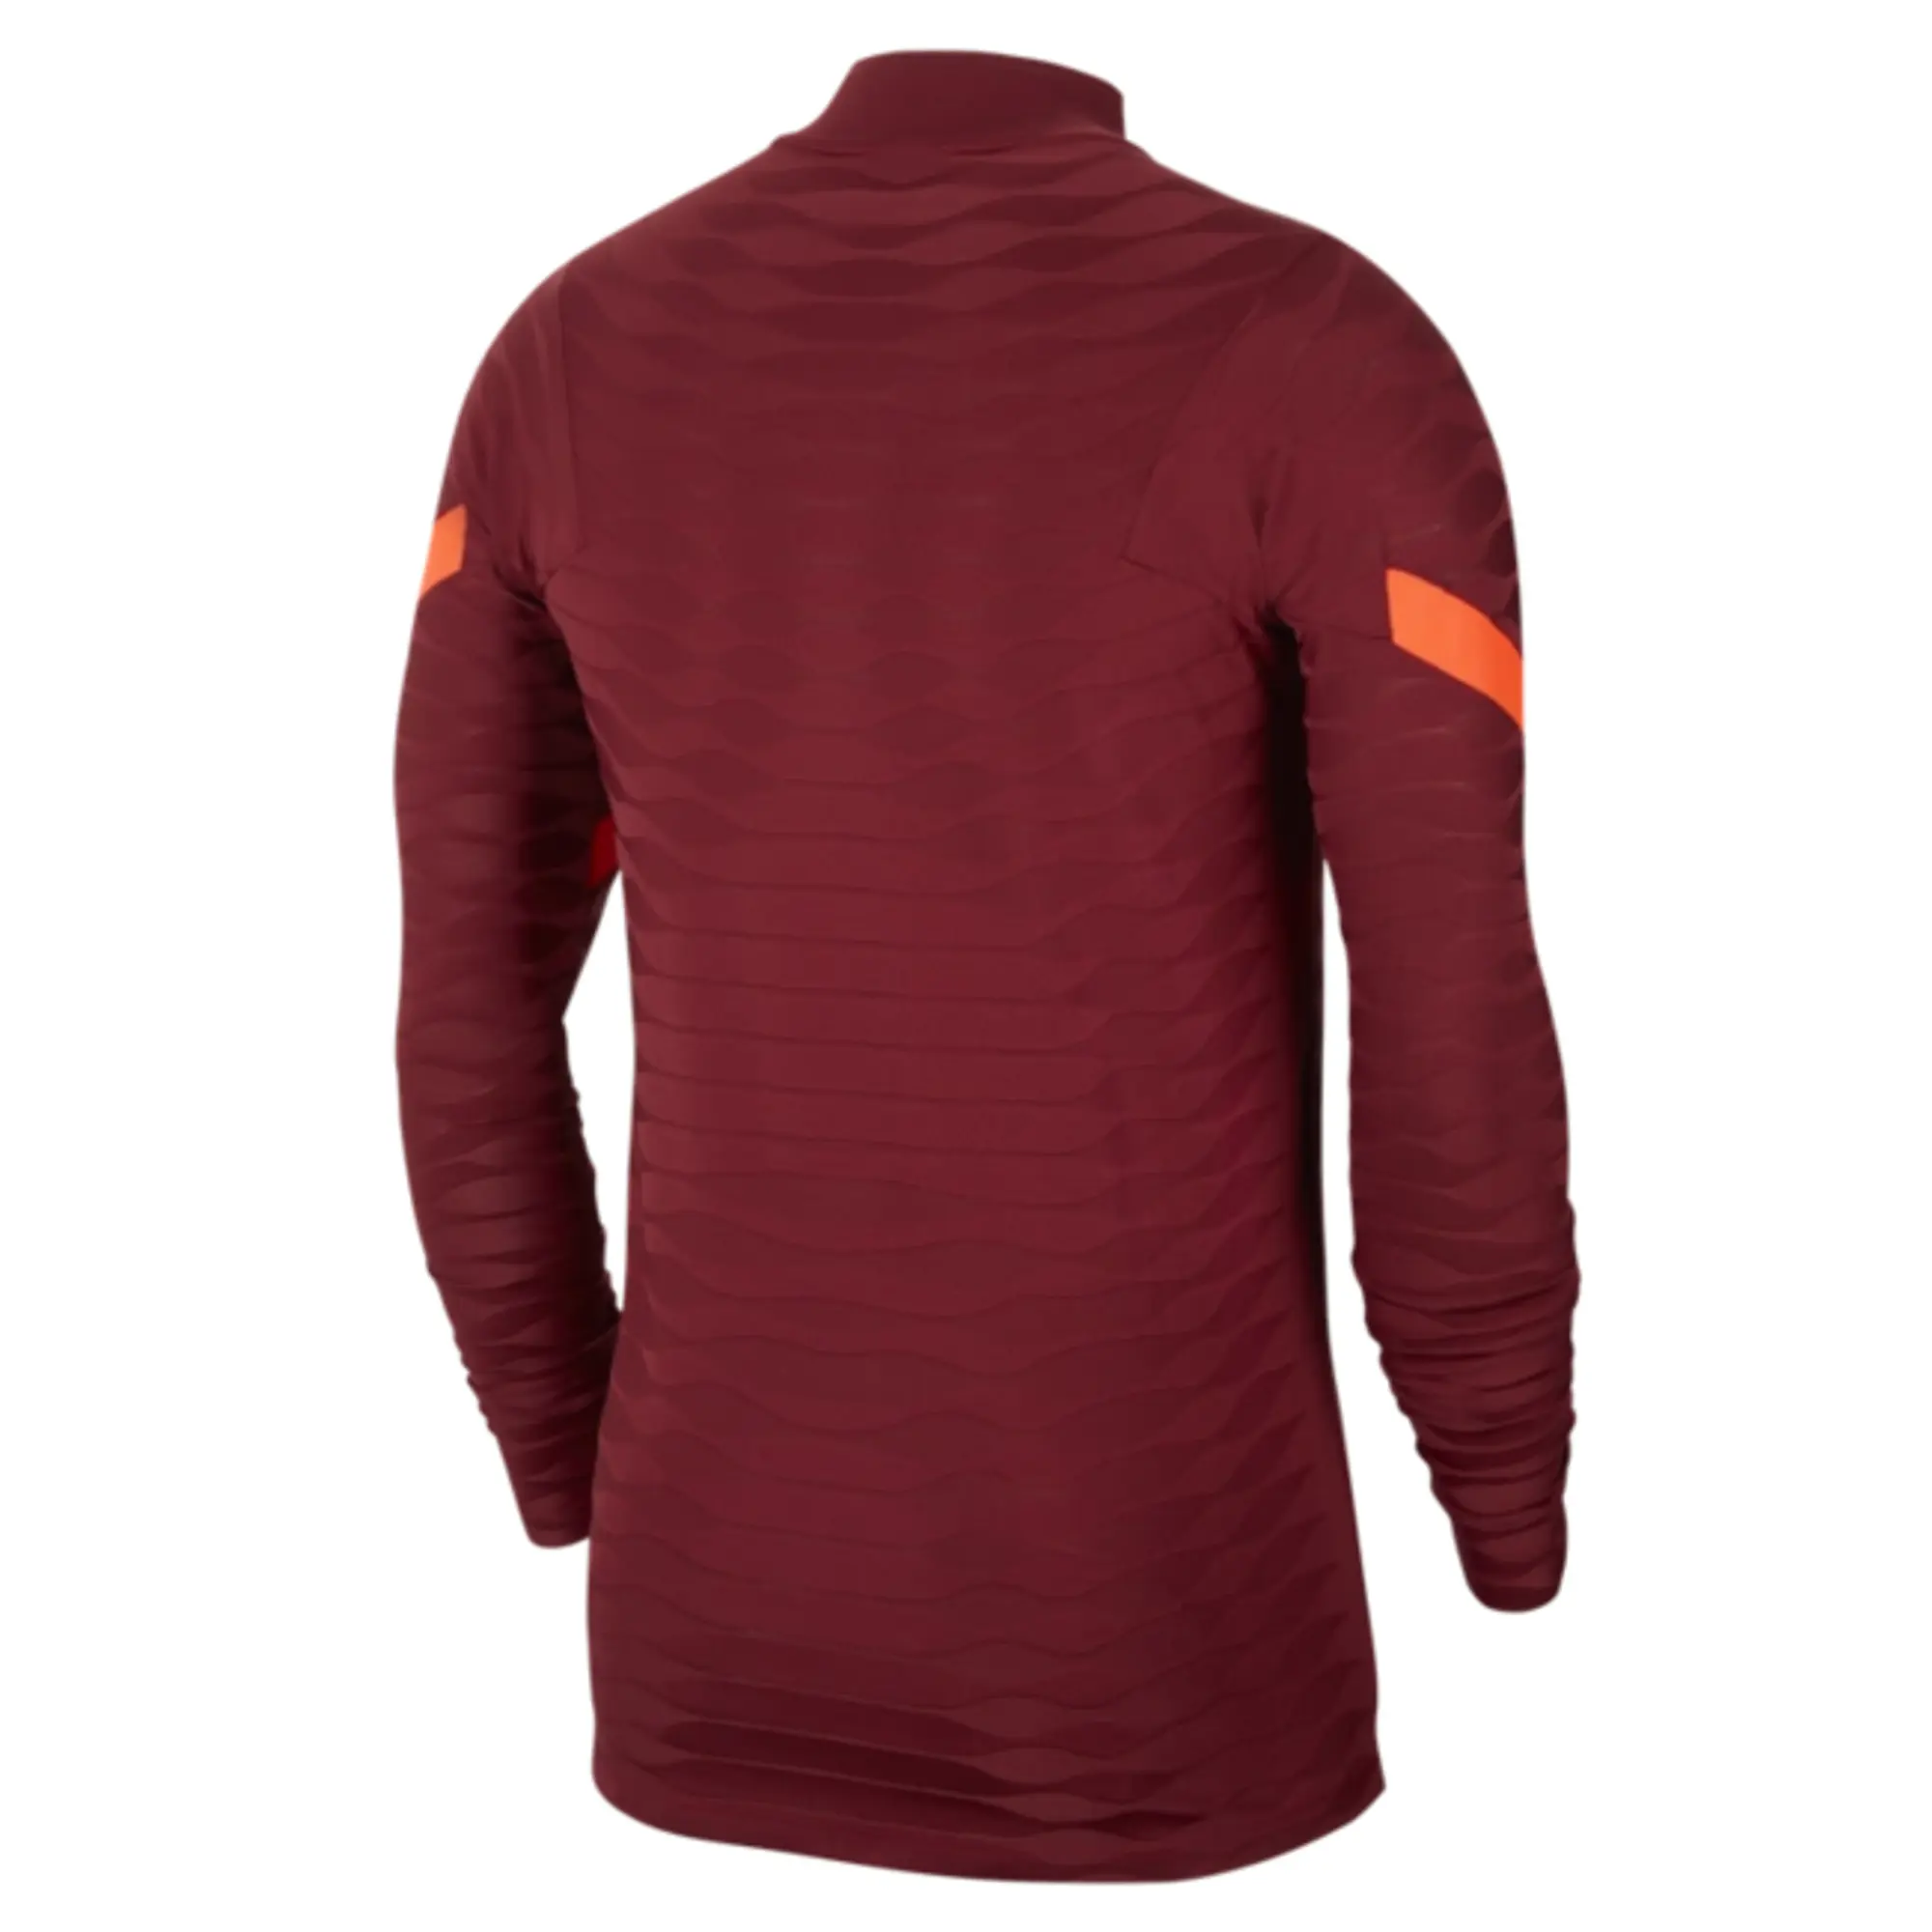 Nike Liverpool Elite Drill Top - Red